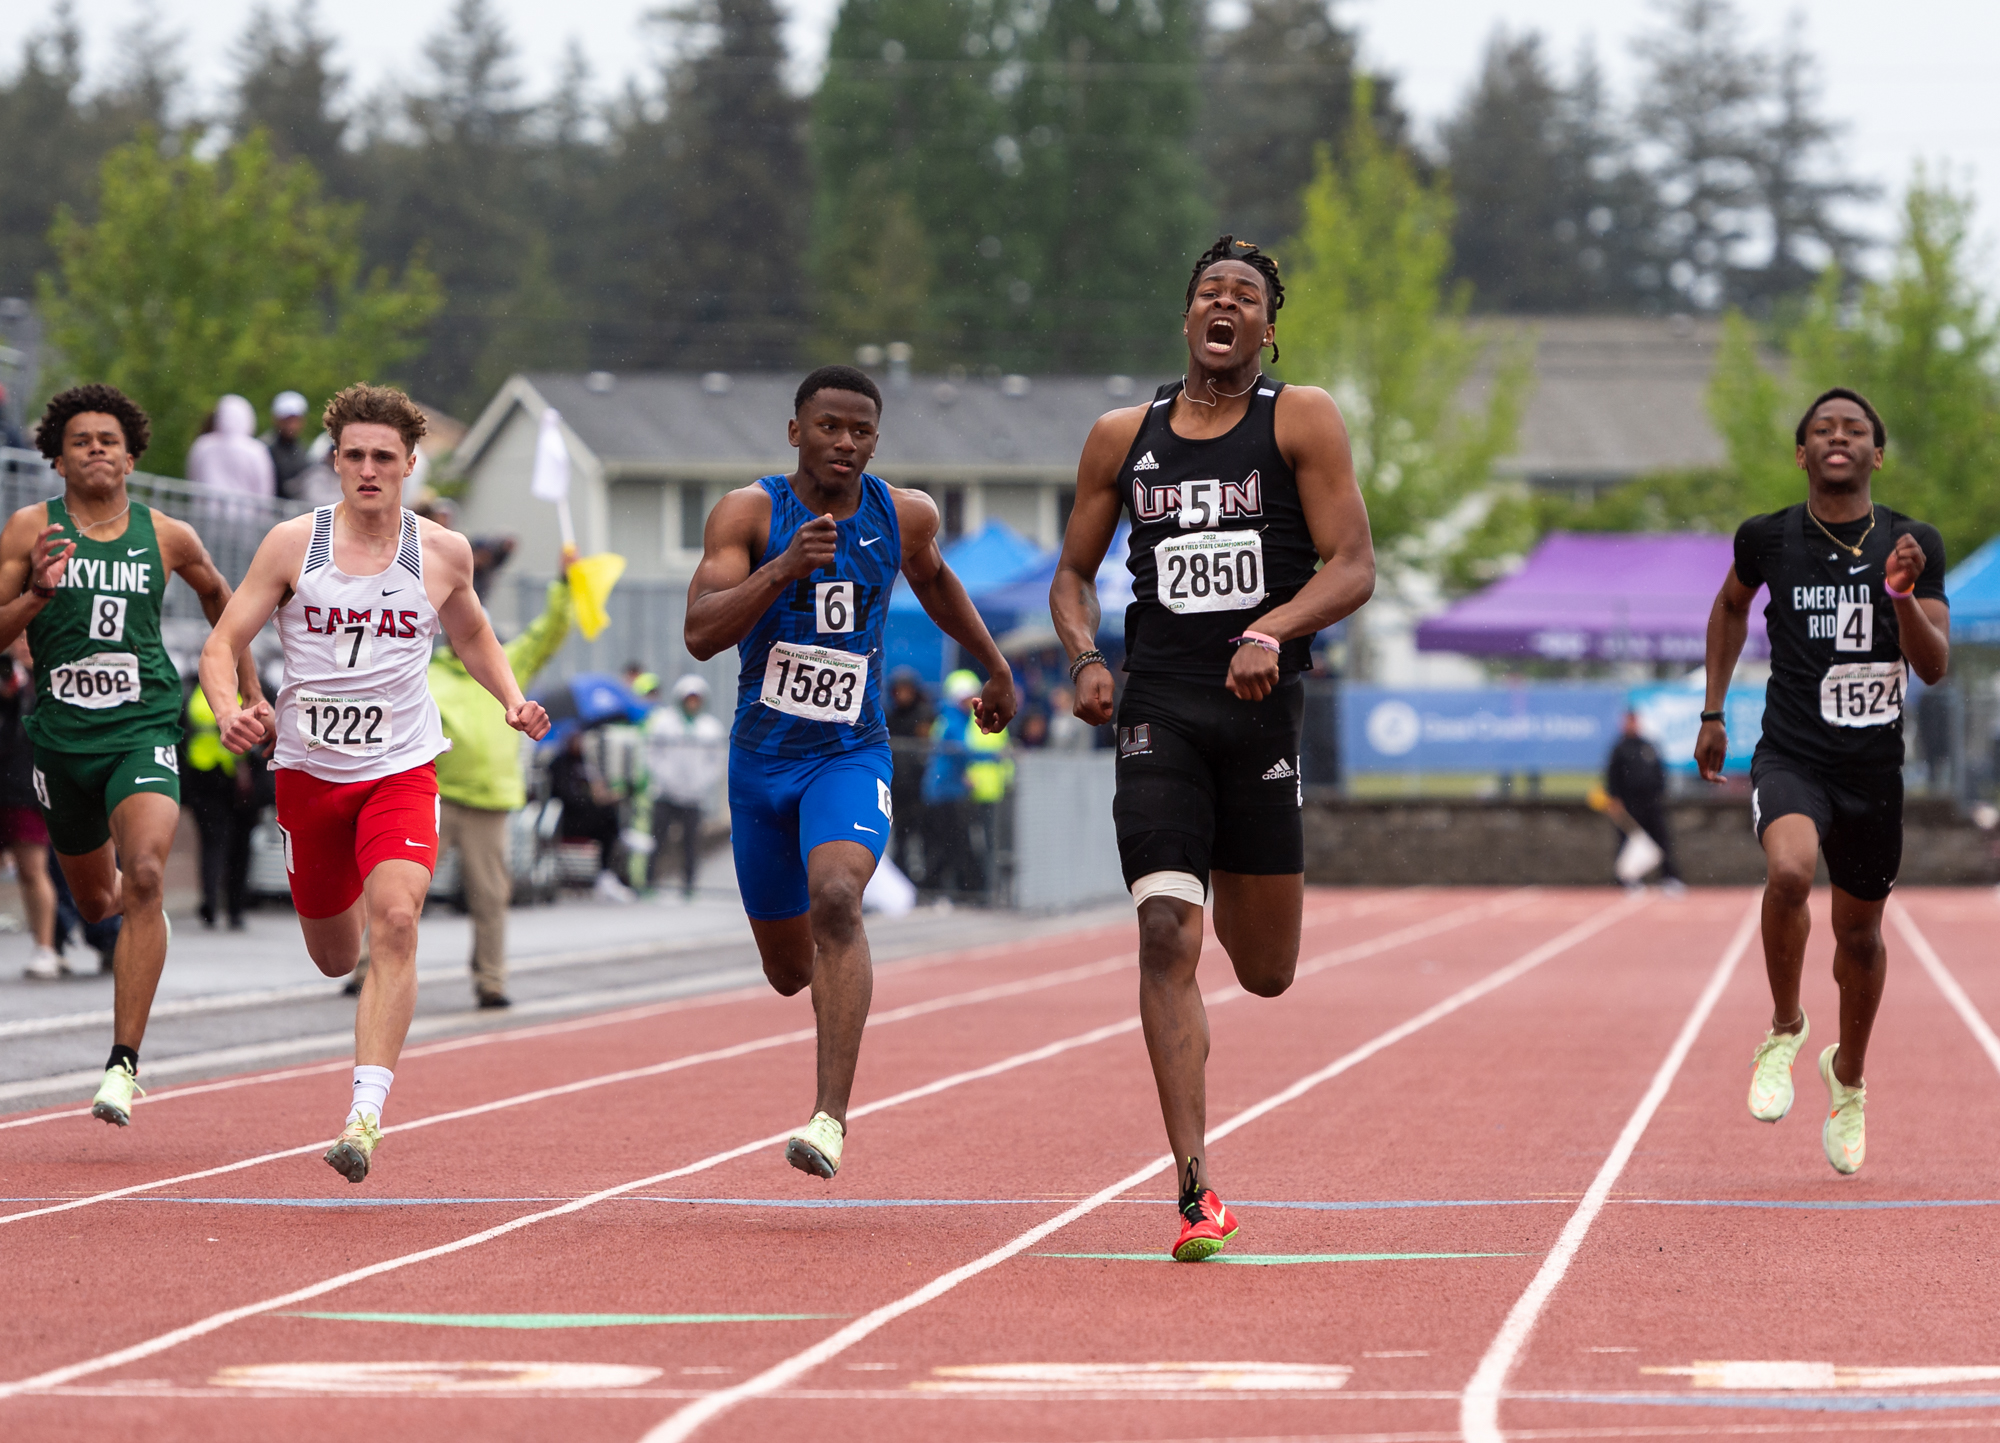 Union's Tobias Merriweather starts screamng with steps to the finish line as he wins the 4A Boys 100 at the 4A/3A/2A State Track and Field Championships on Saturday, May 28, 2022, at Mount Tahoma High School in Tacoma.